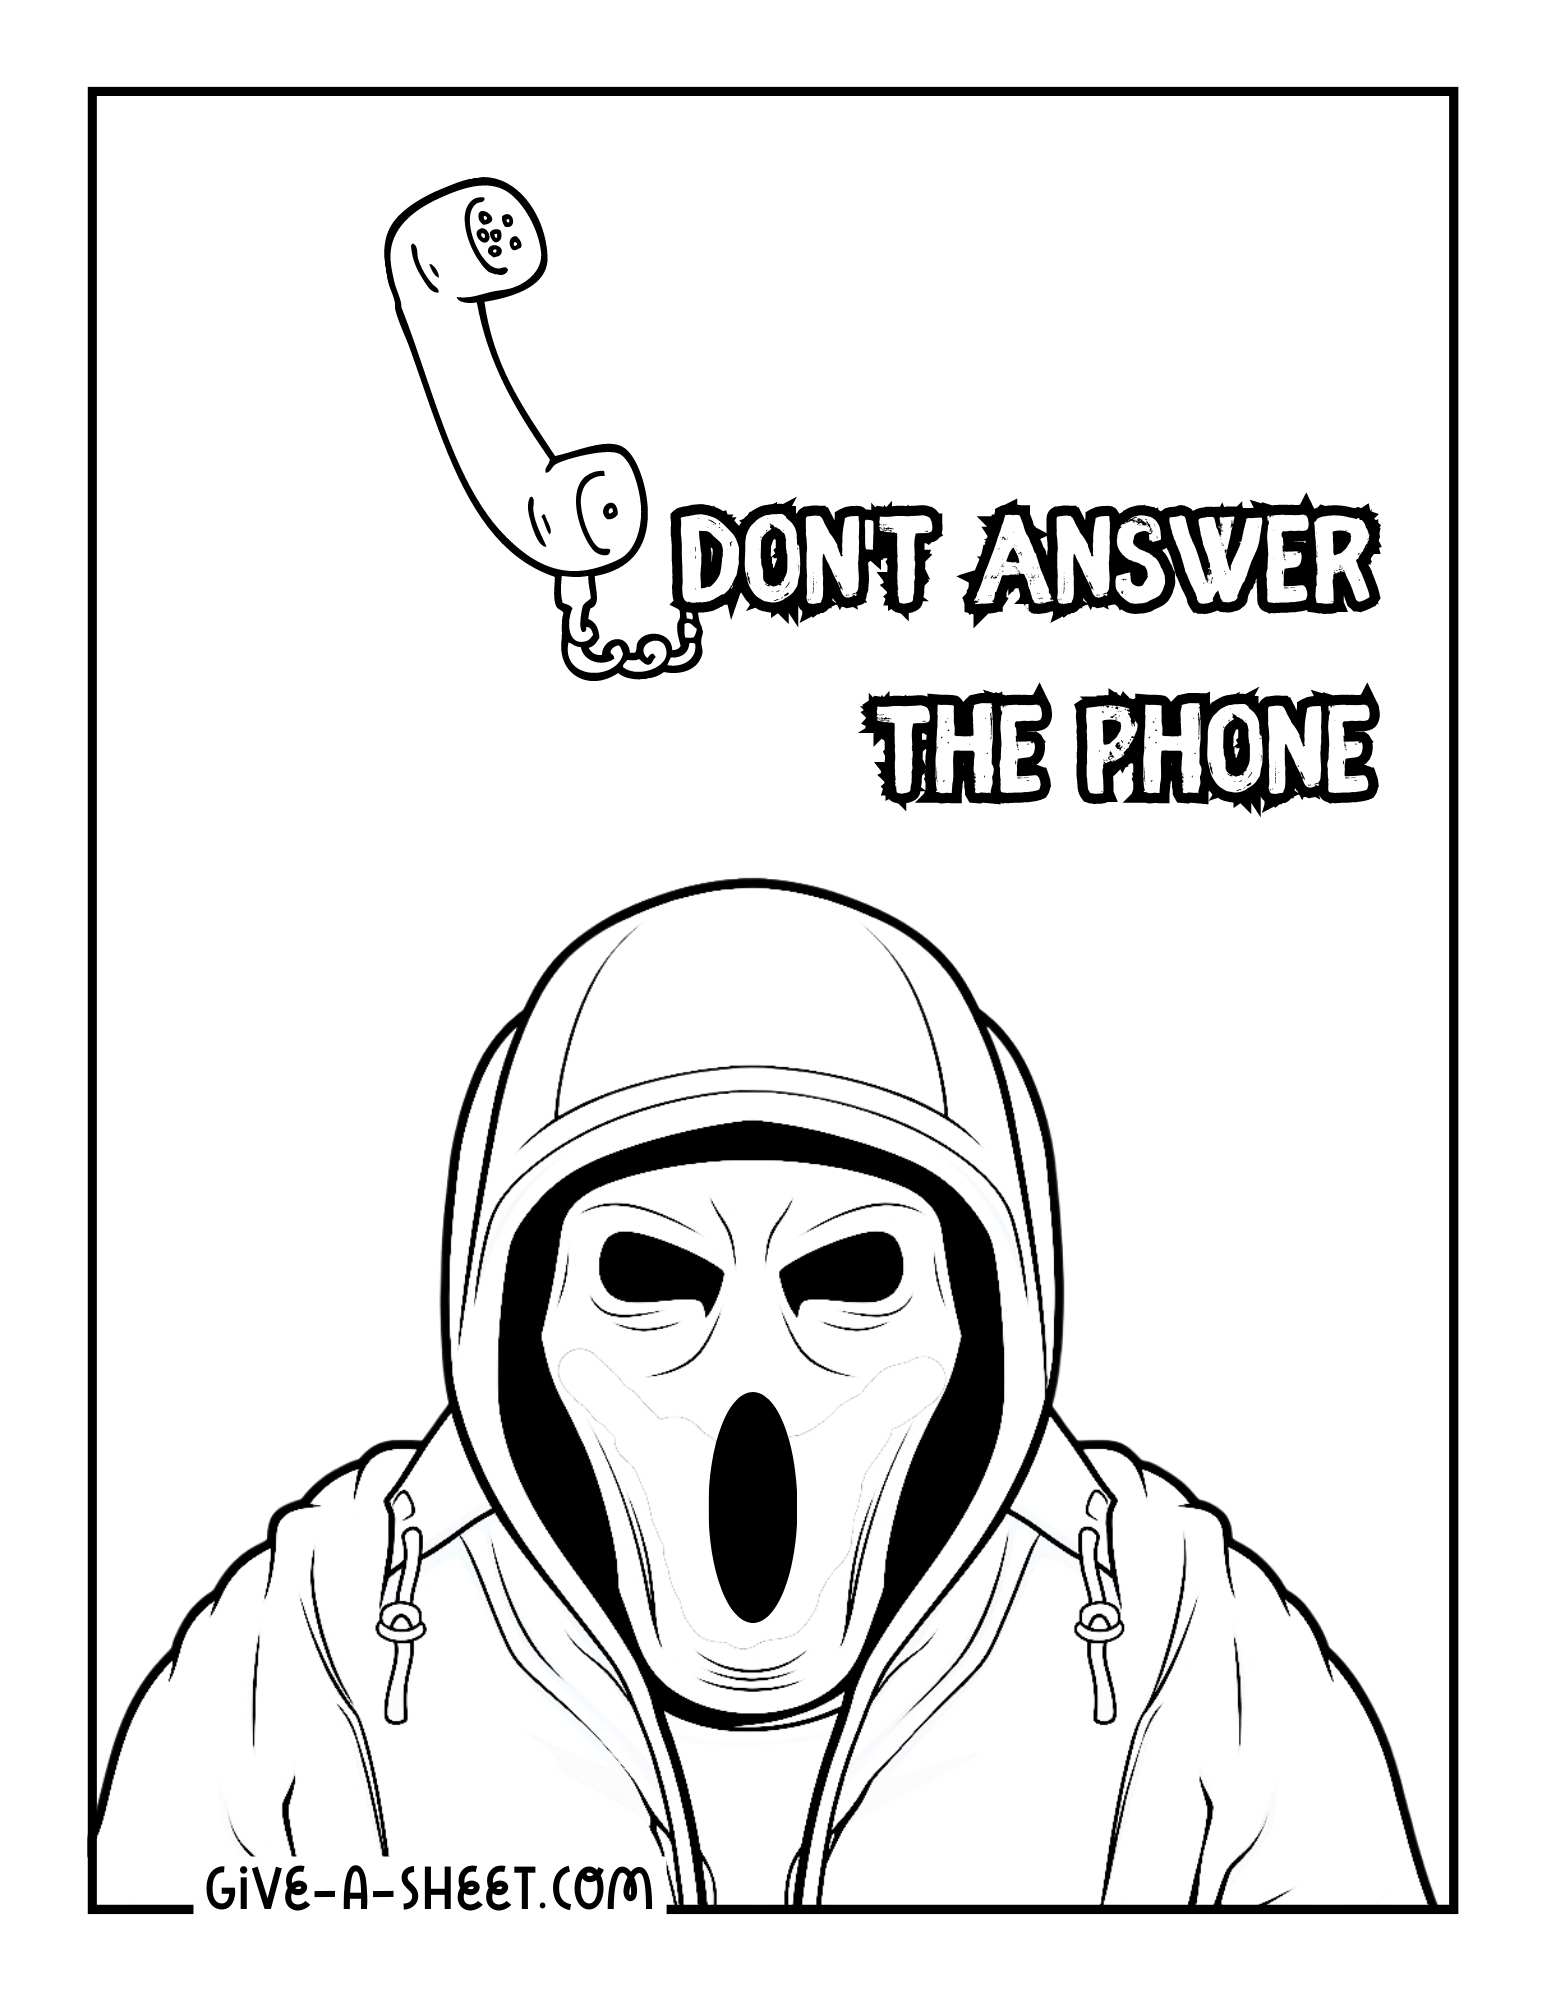 Slasher don't answer the phone scream coloring page for adults.